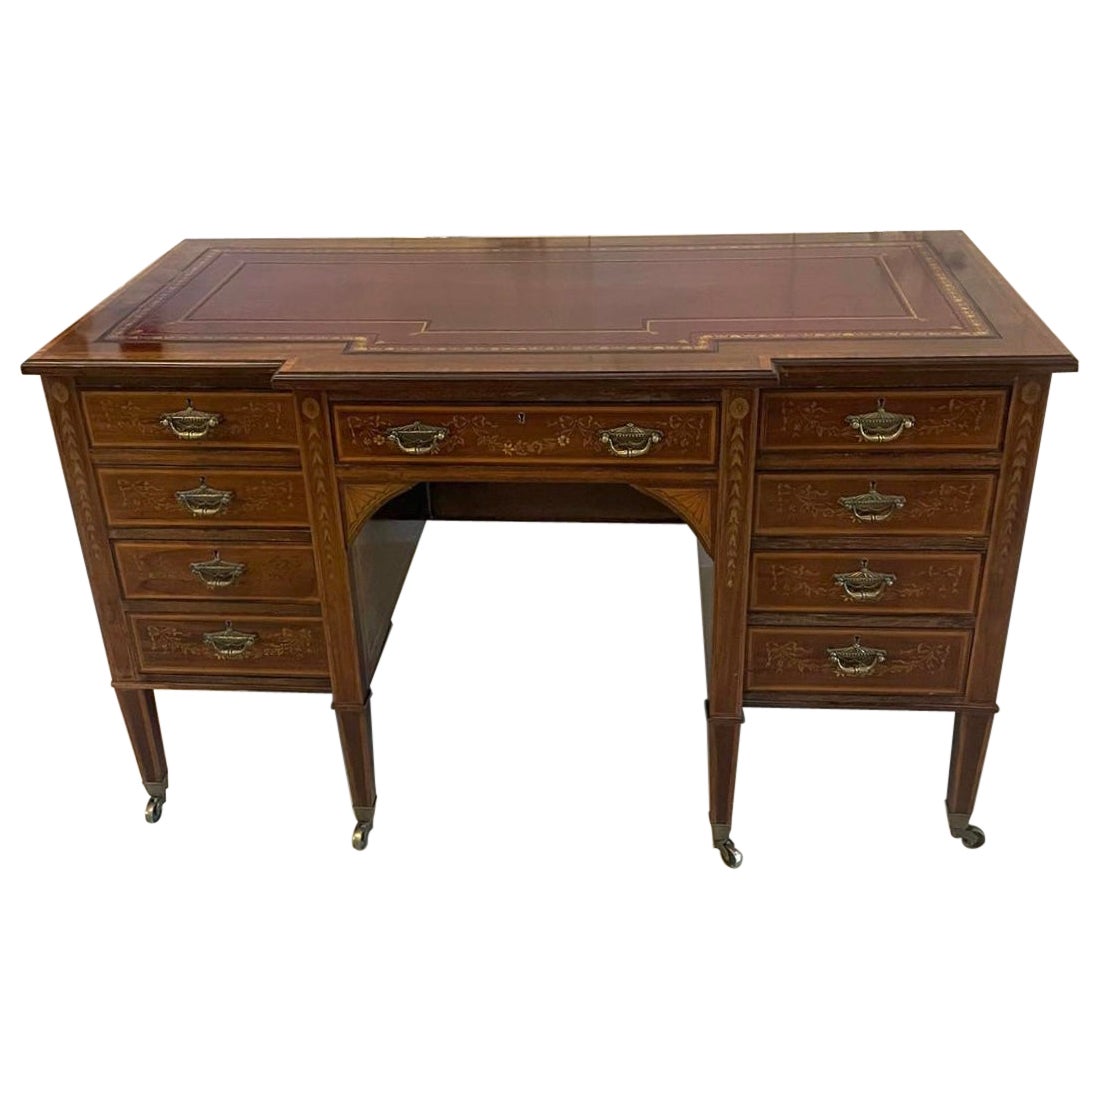 Quality Antique Victorian Mahogany Inlaid Kneehole Desk by Edwards and Roberts